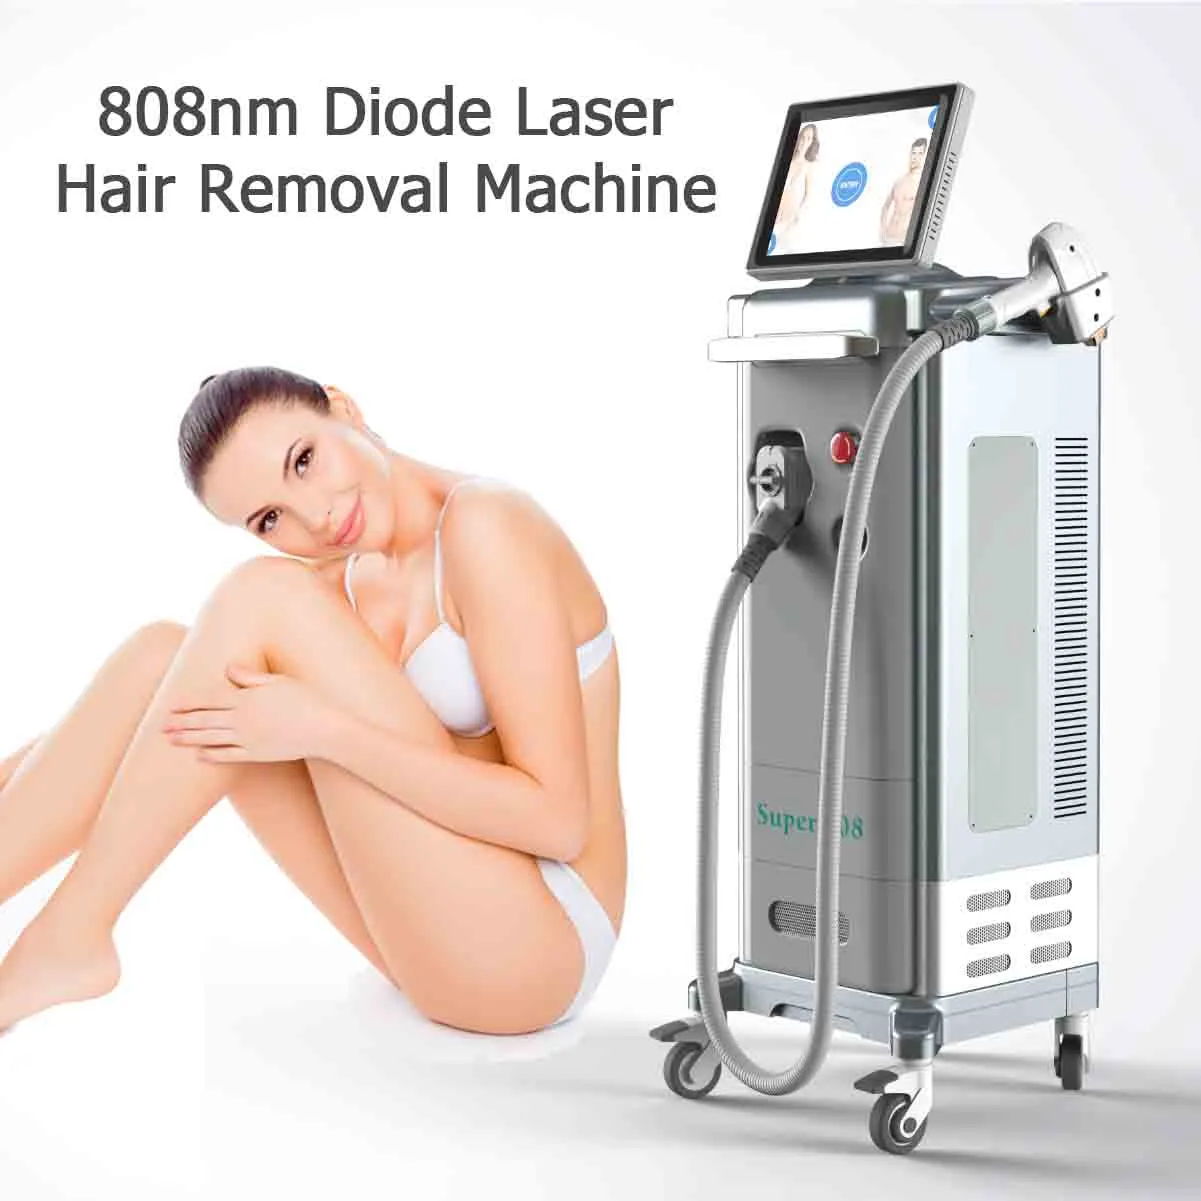 808 nm diode laser hair removal machine Beauty salon device American Bar permanent painless whitening